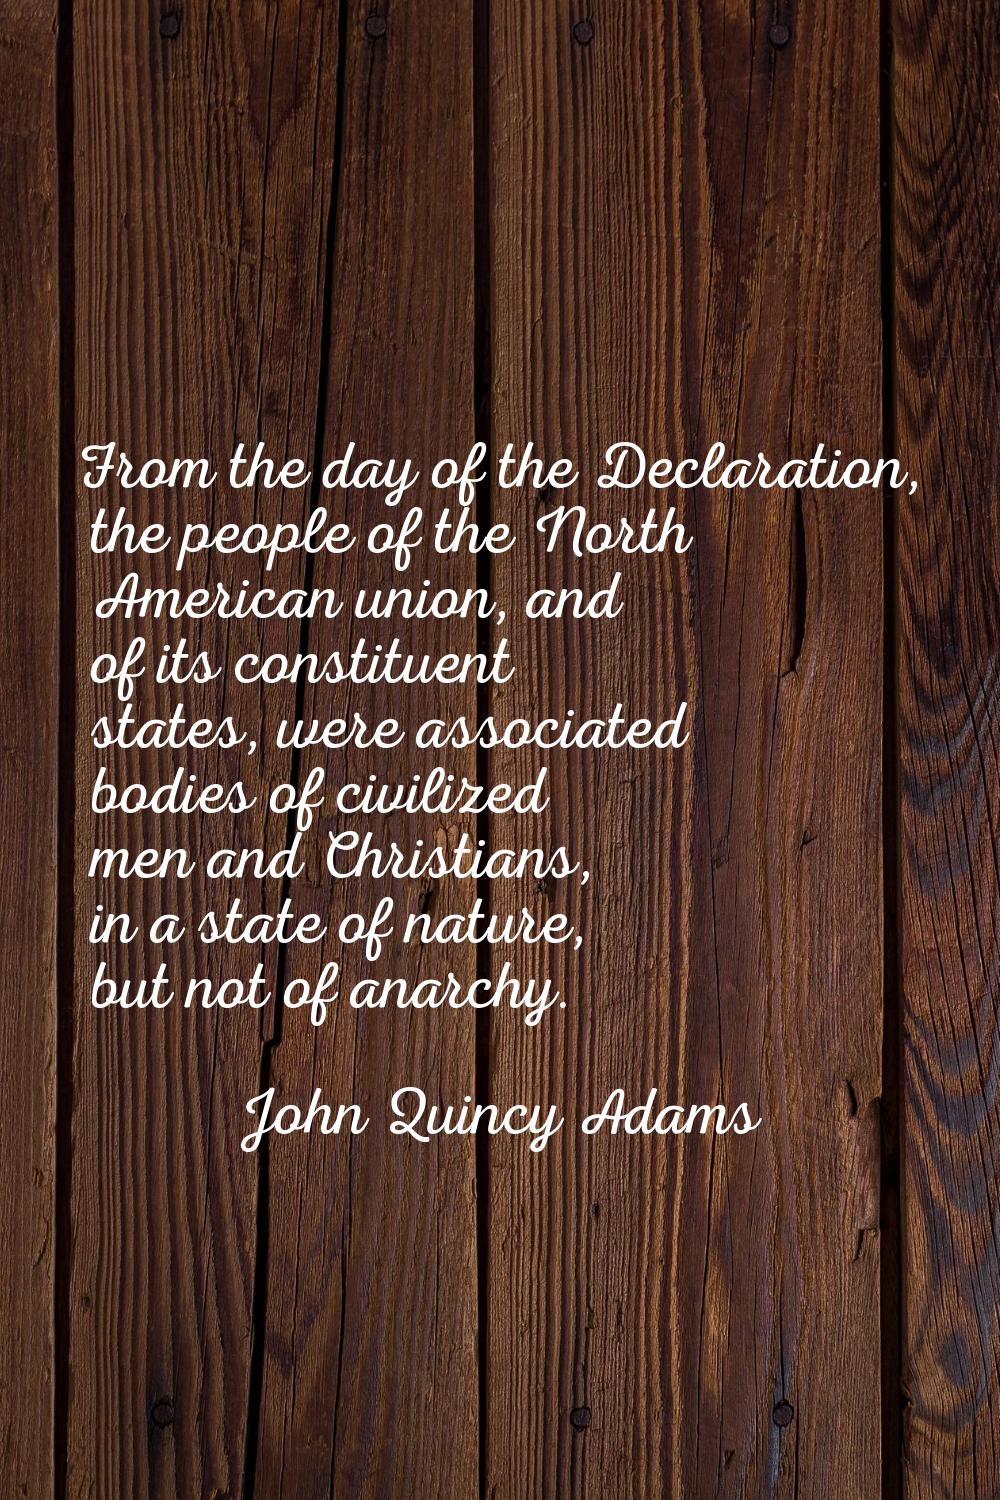 From the day of the Declaration, the people of the North American union, and of its constituent sta